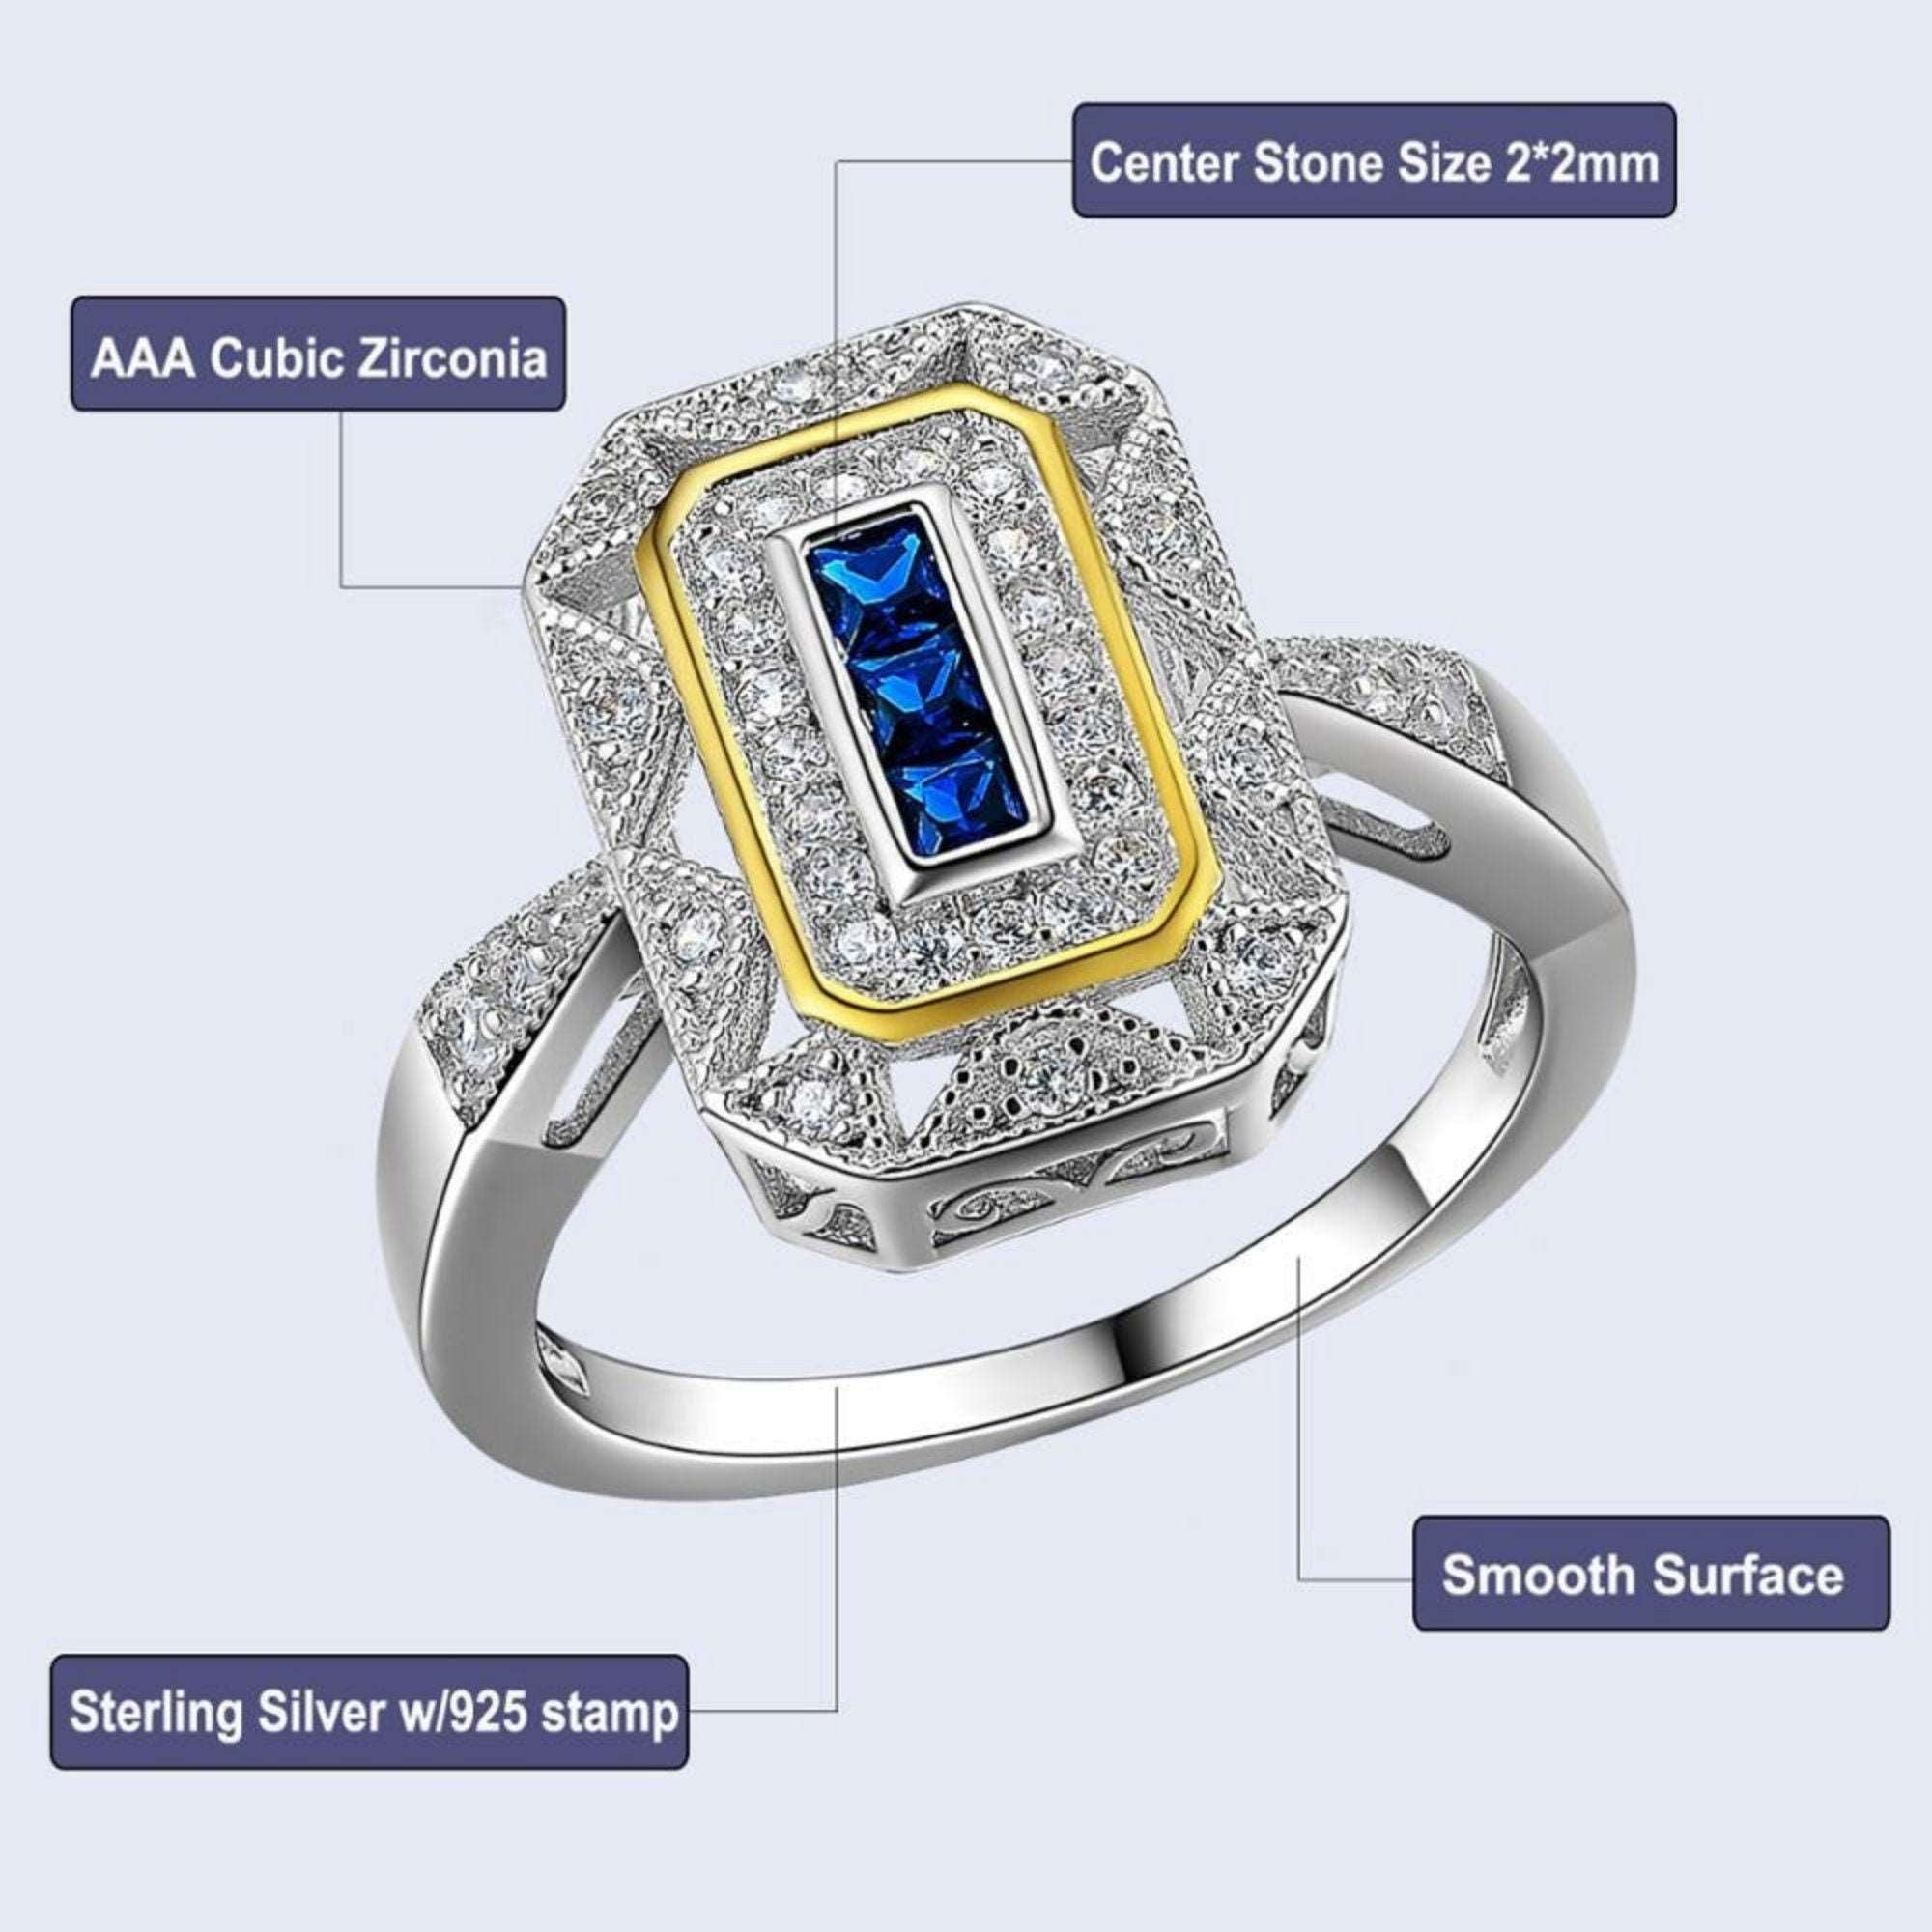 Engagement Wedding Rings for Women, Classic Jewelry Crystalstile